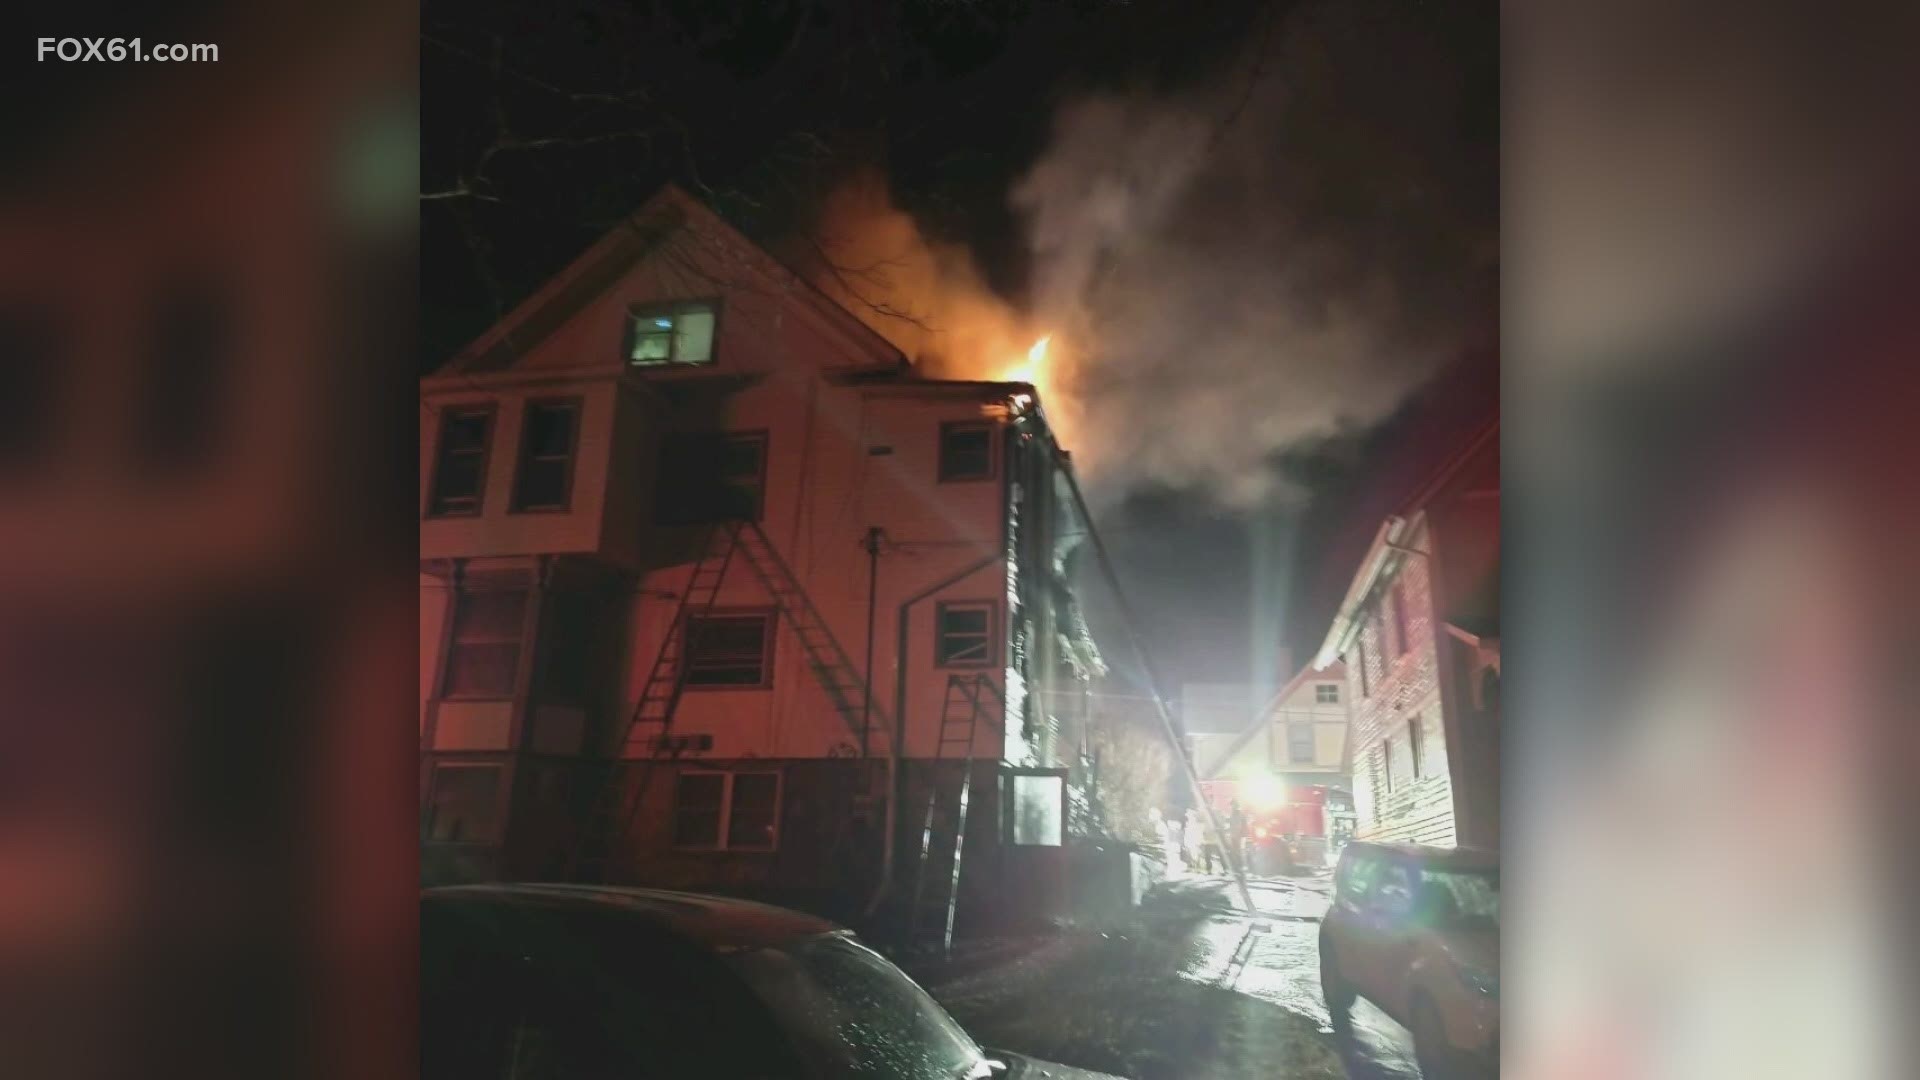 It took Williamantic firefighters and several crews from surrounding towns two hours to douse the flames.